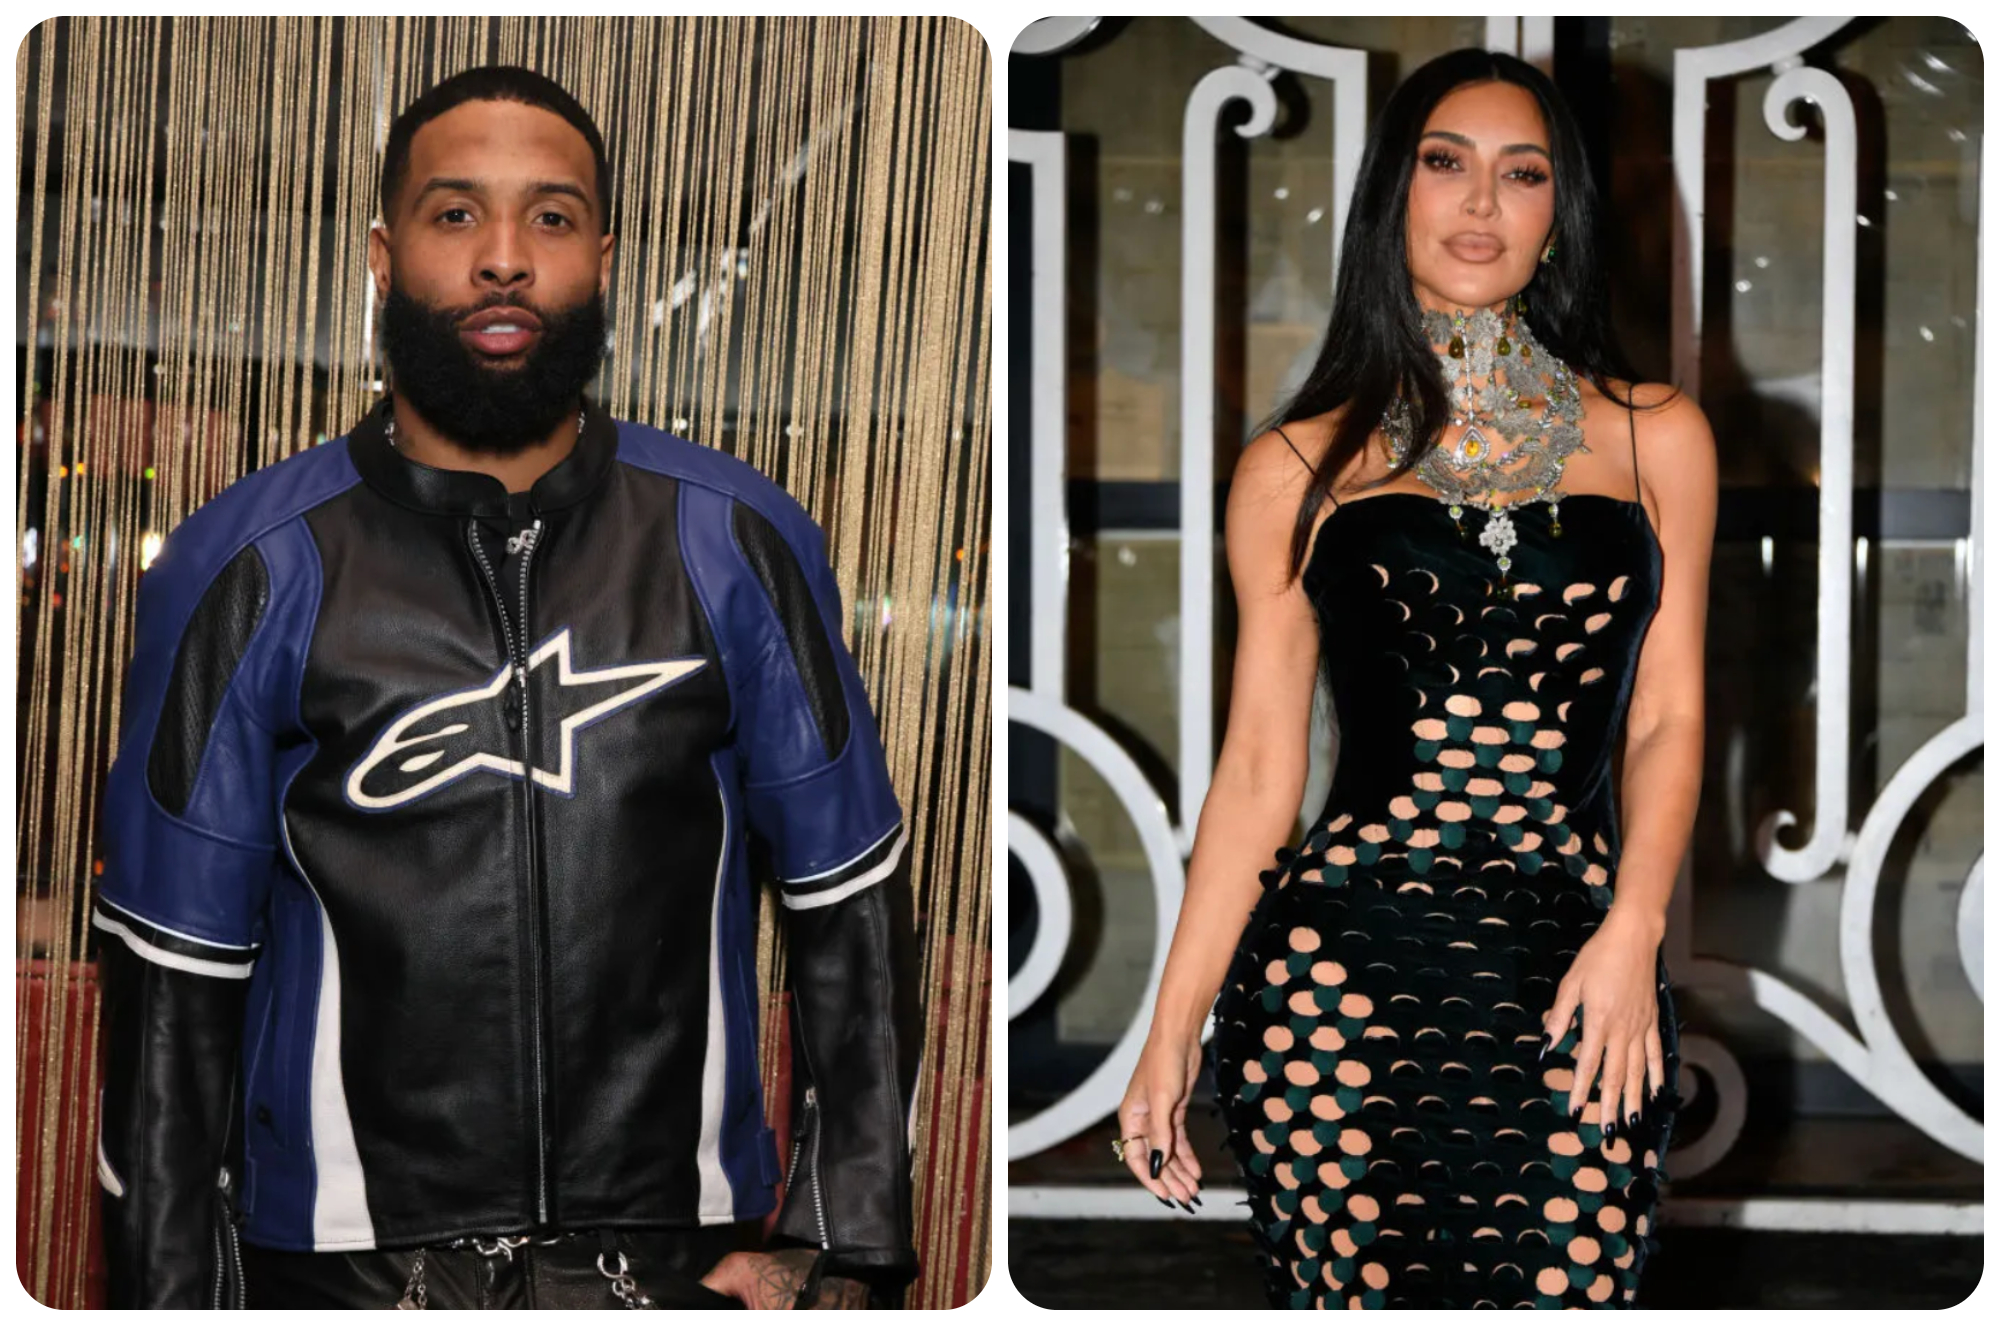 Keeping It Kasual Or Serious Swirling: Are Things Heating Up For Kim Kardashian And Odell Beckham Jr.?!